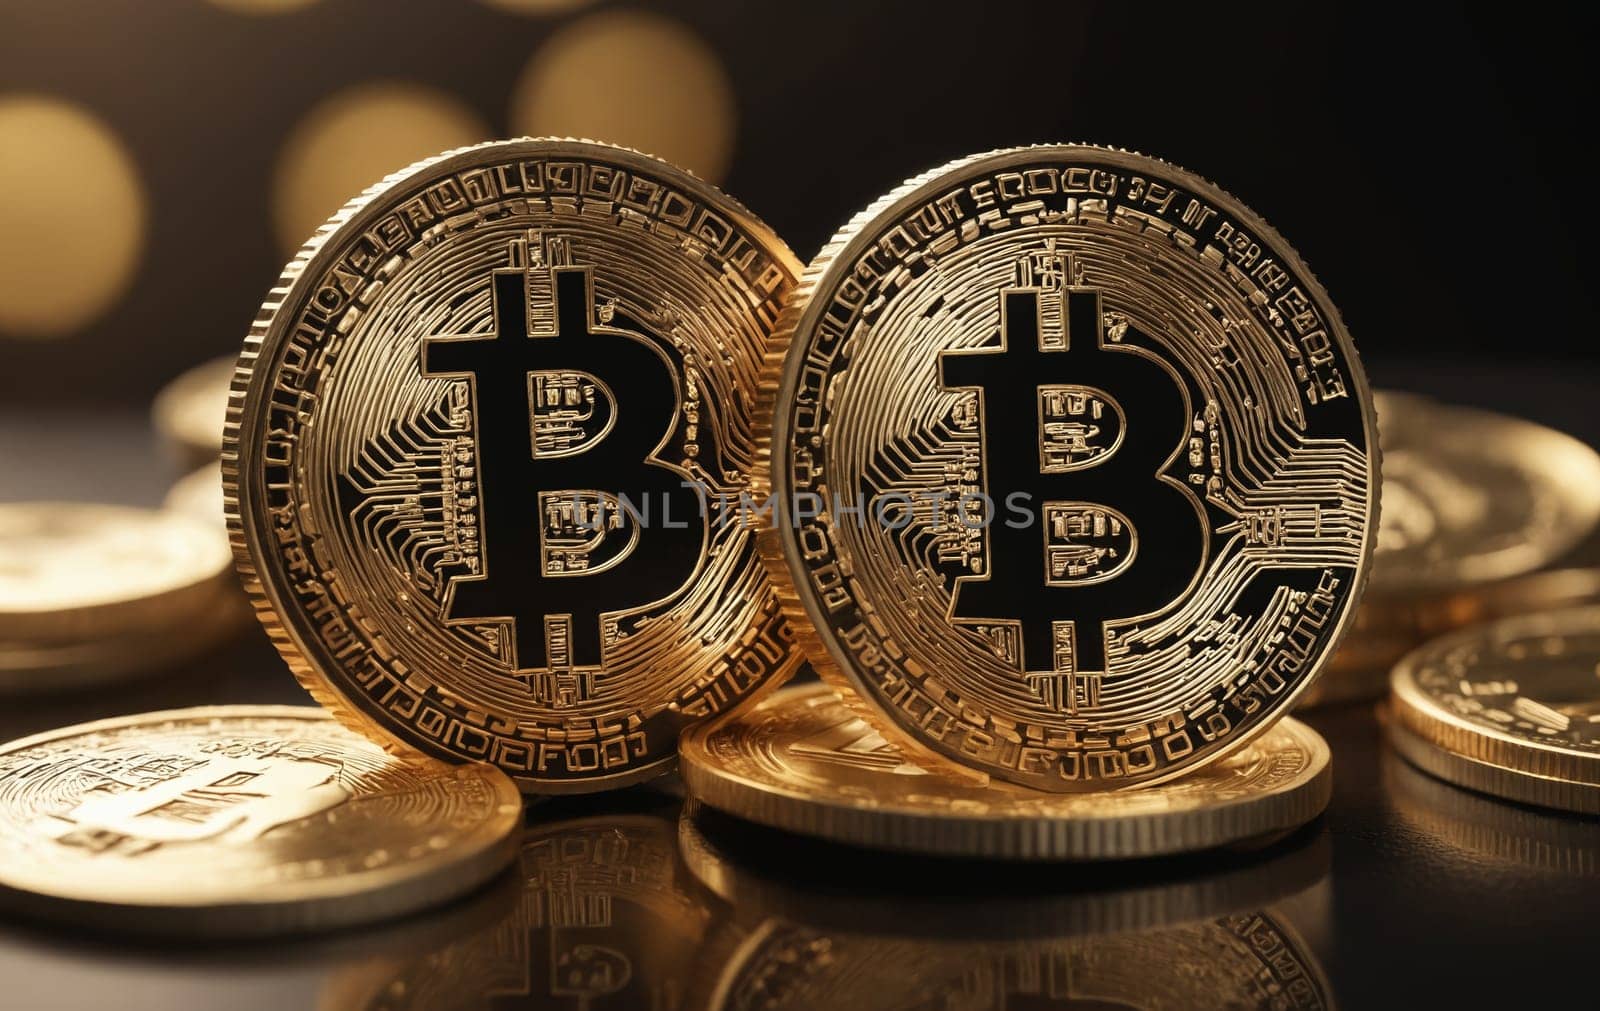 Three bitcoin coins are arranged in a stack on a table, showcasing the digital currency in a closeup, macro photography style